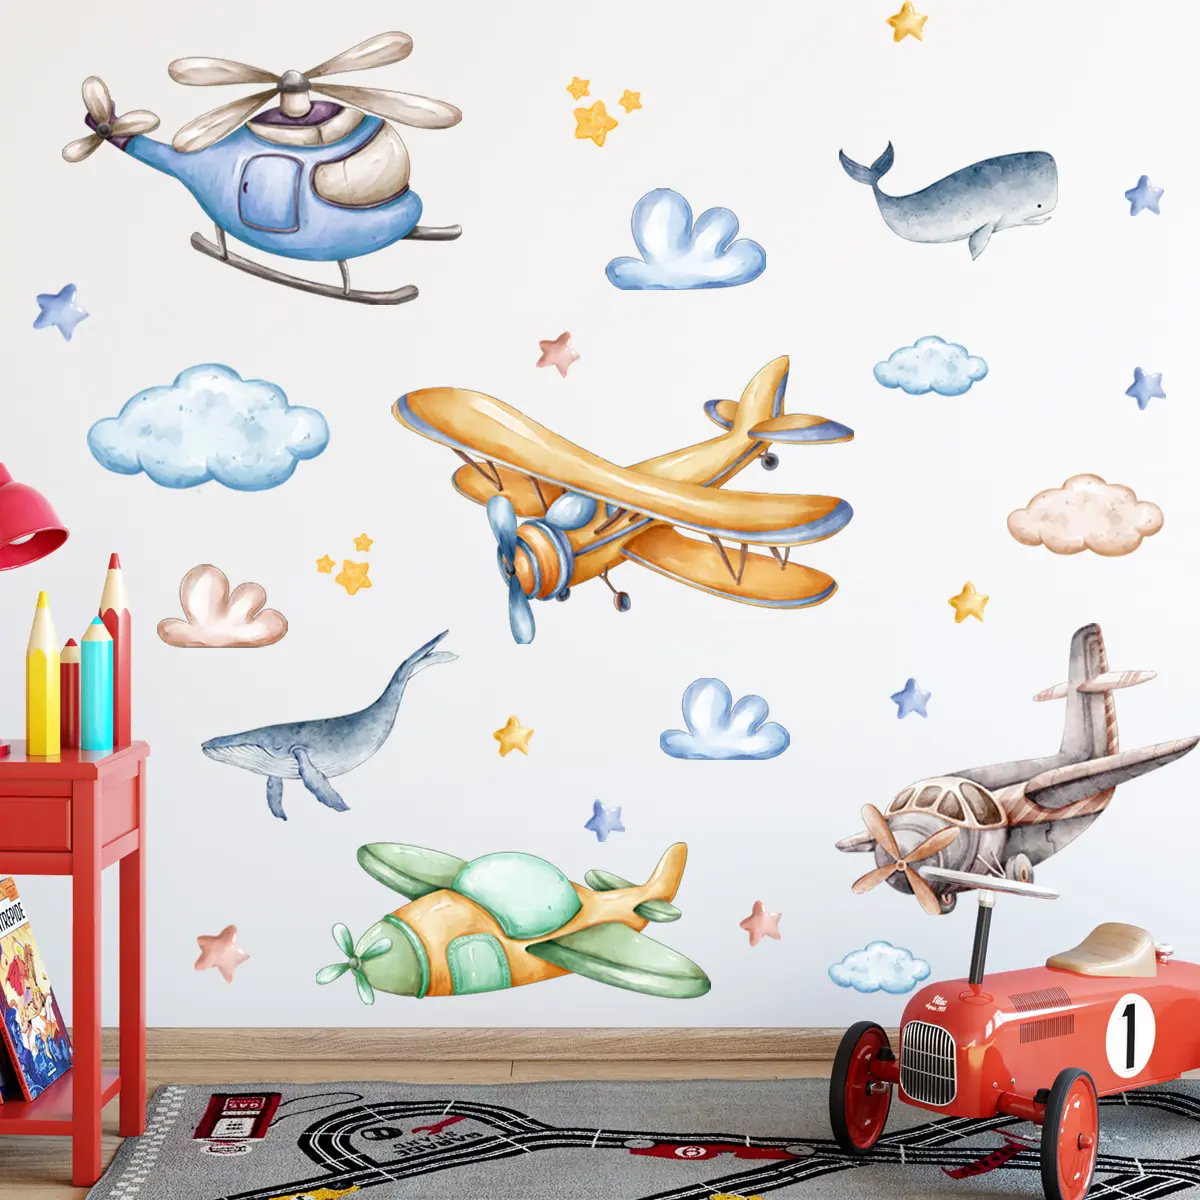 Cartoon Airplane Removable Wall Stickers Whale Decals Cloud Wall Decors for Boys Bedroom Decoration